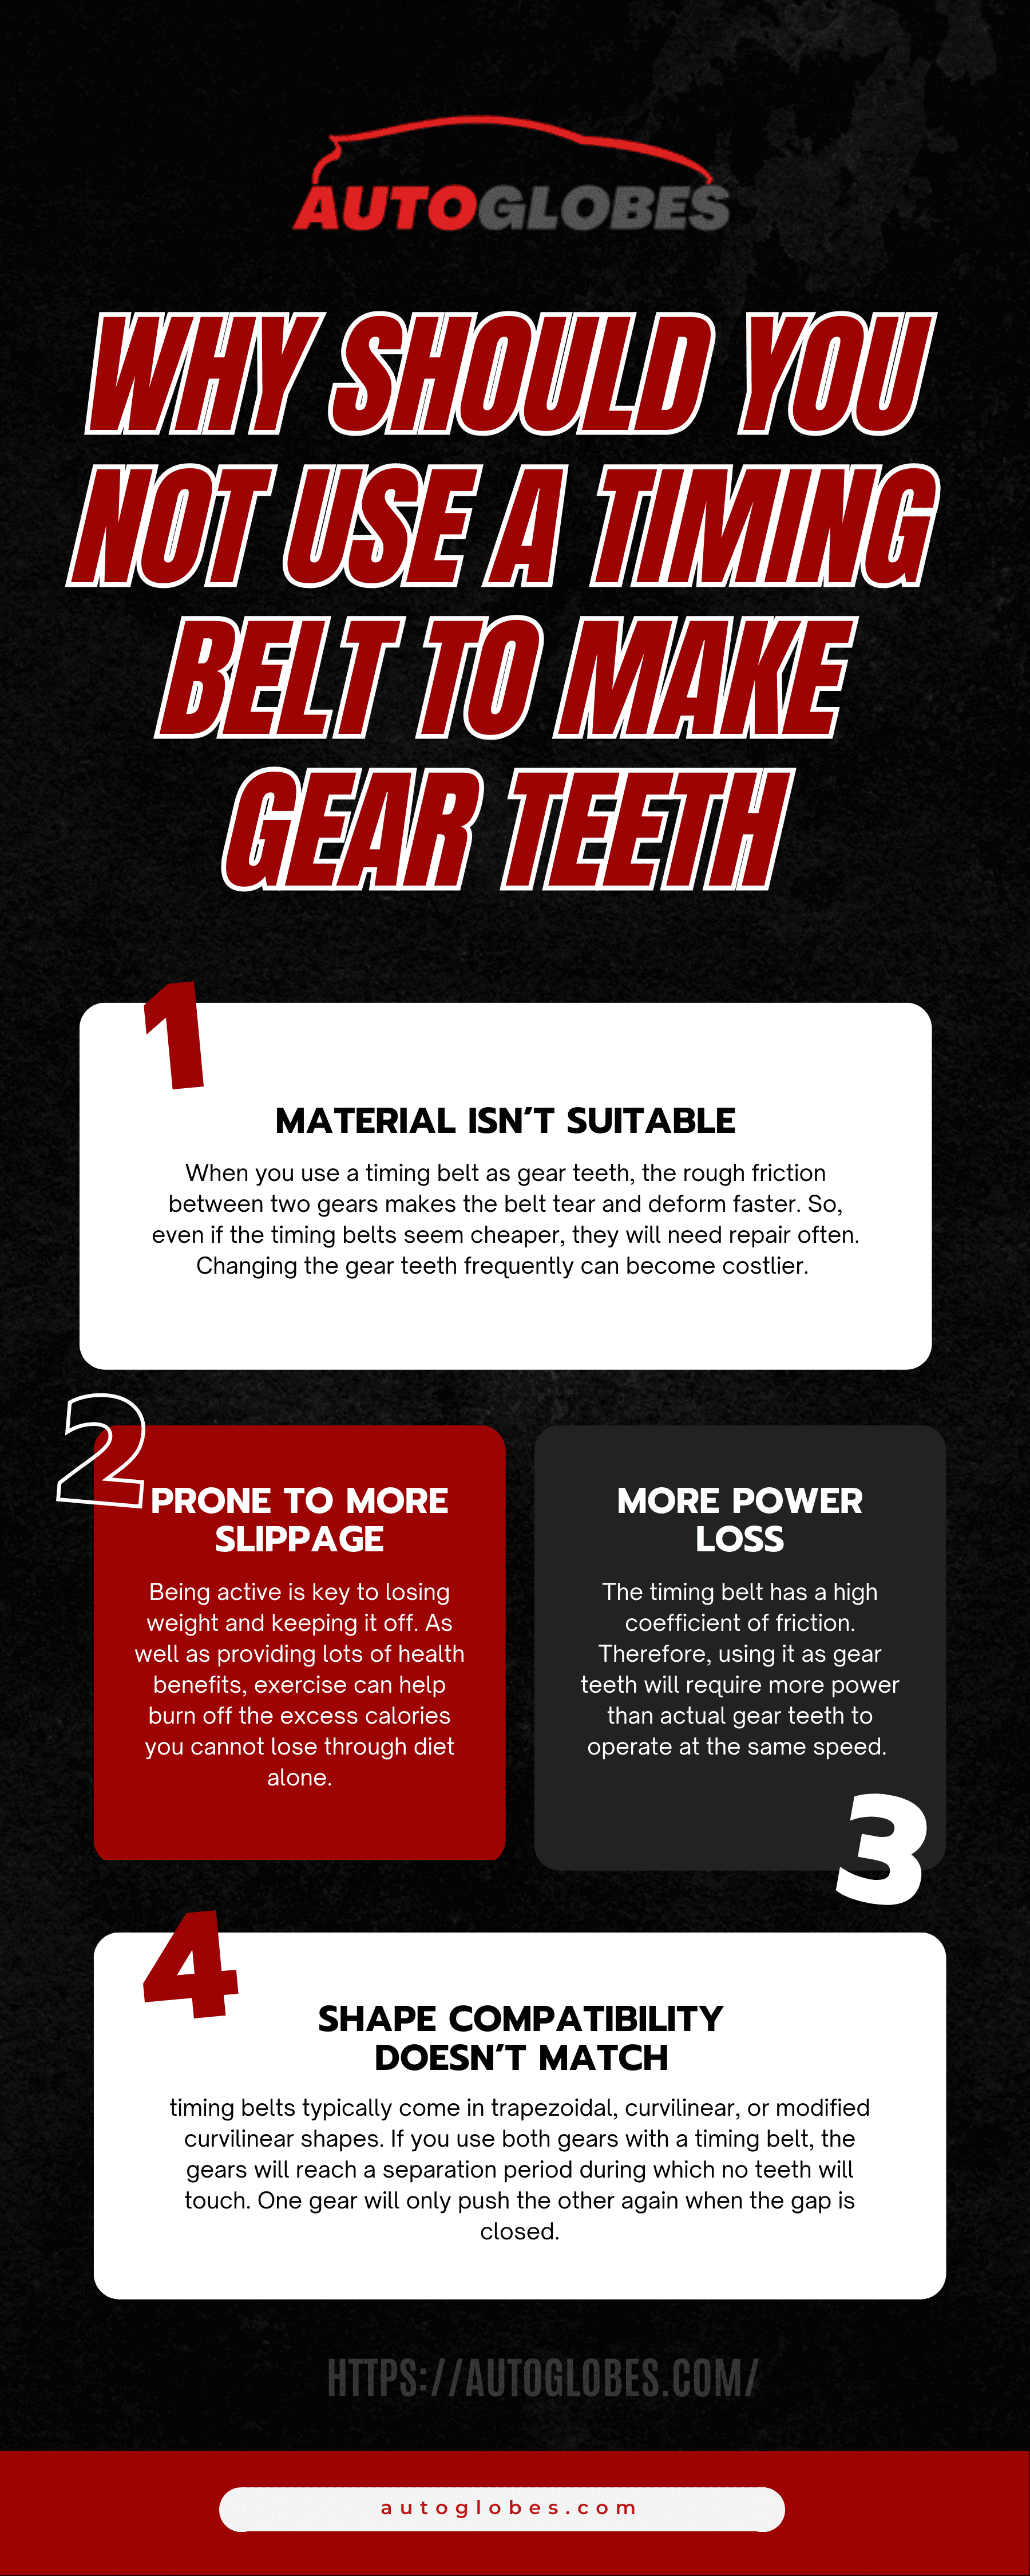 Why Should You Not Use A Timing Belt To Make Gear Teeth Infographic